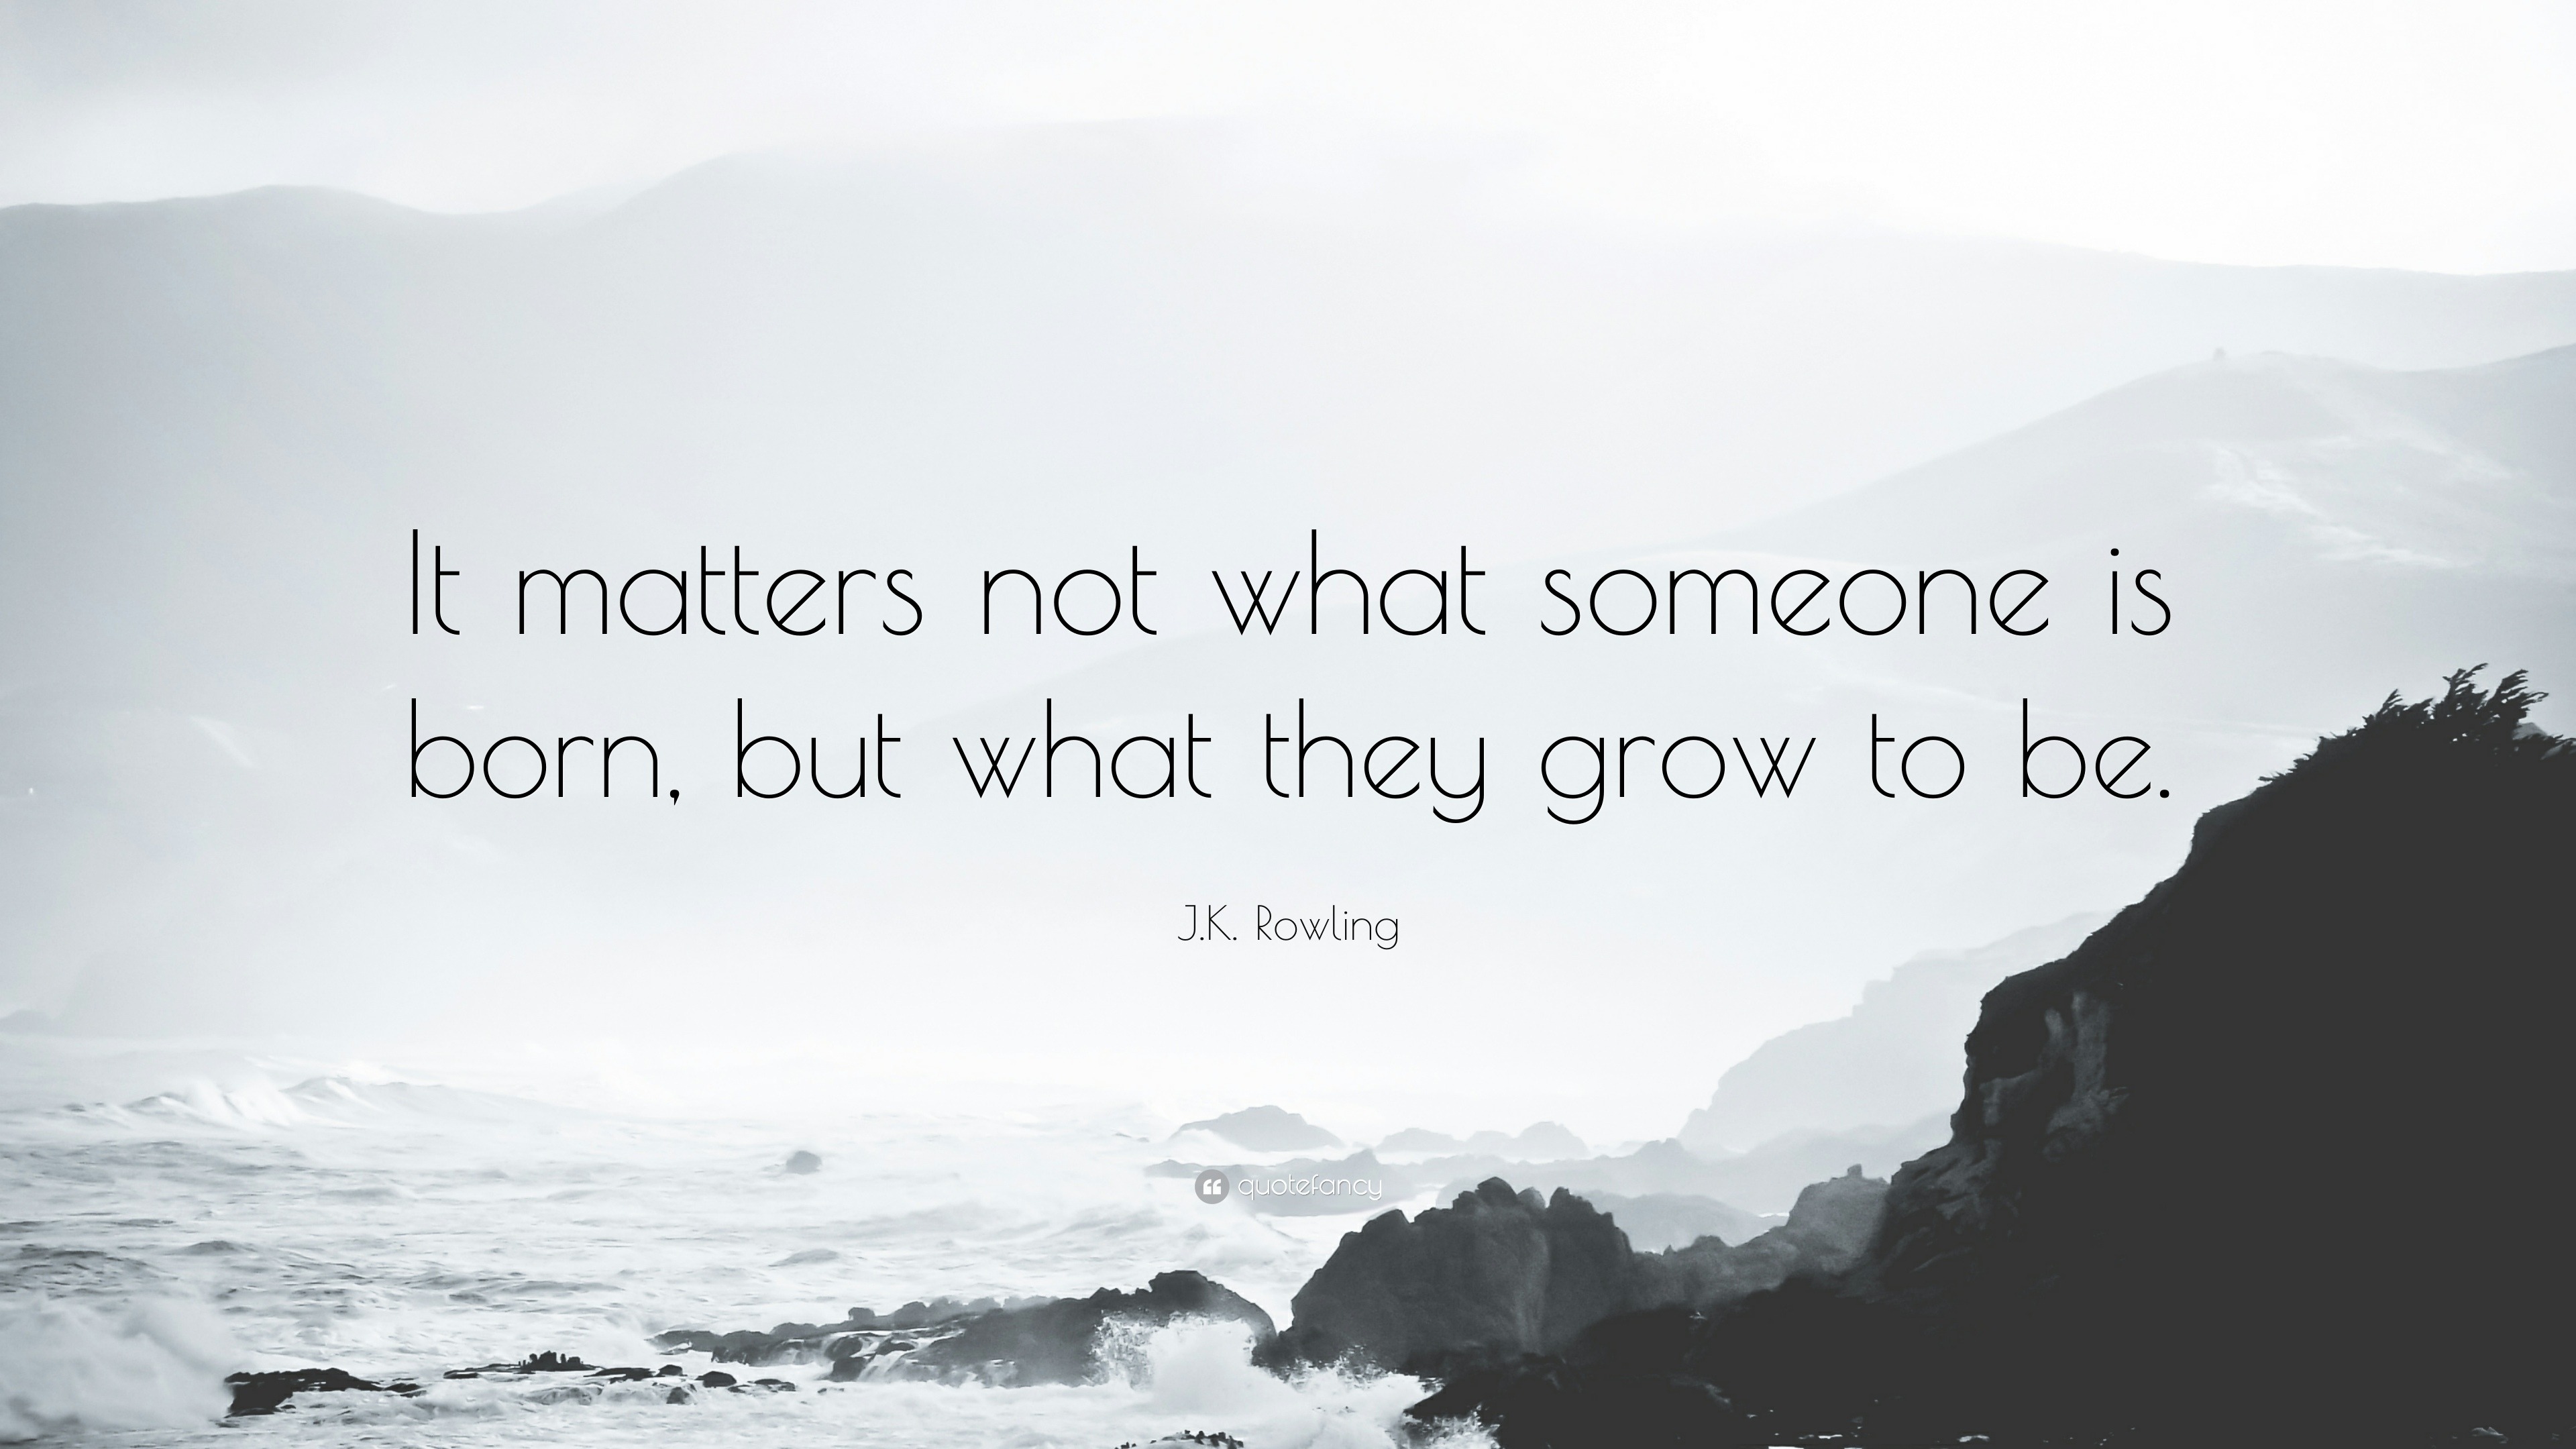 Jk Rowling Quote “it Matters Not What Someone Is Born But What They Grow To Be”